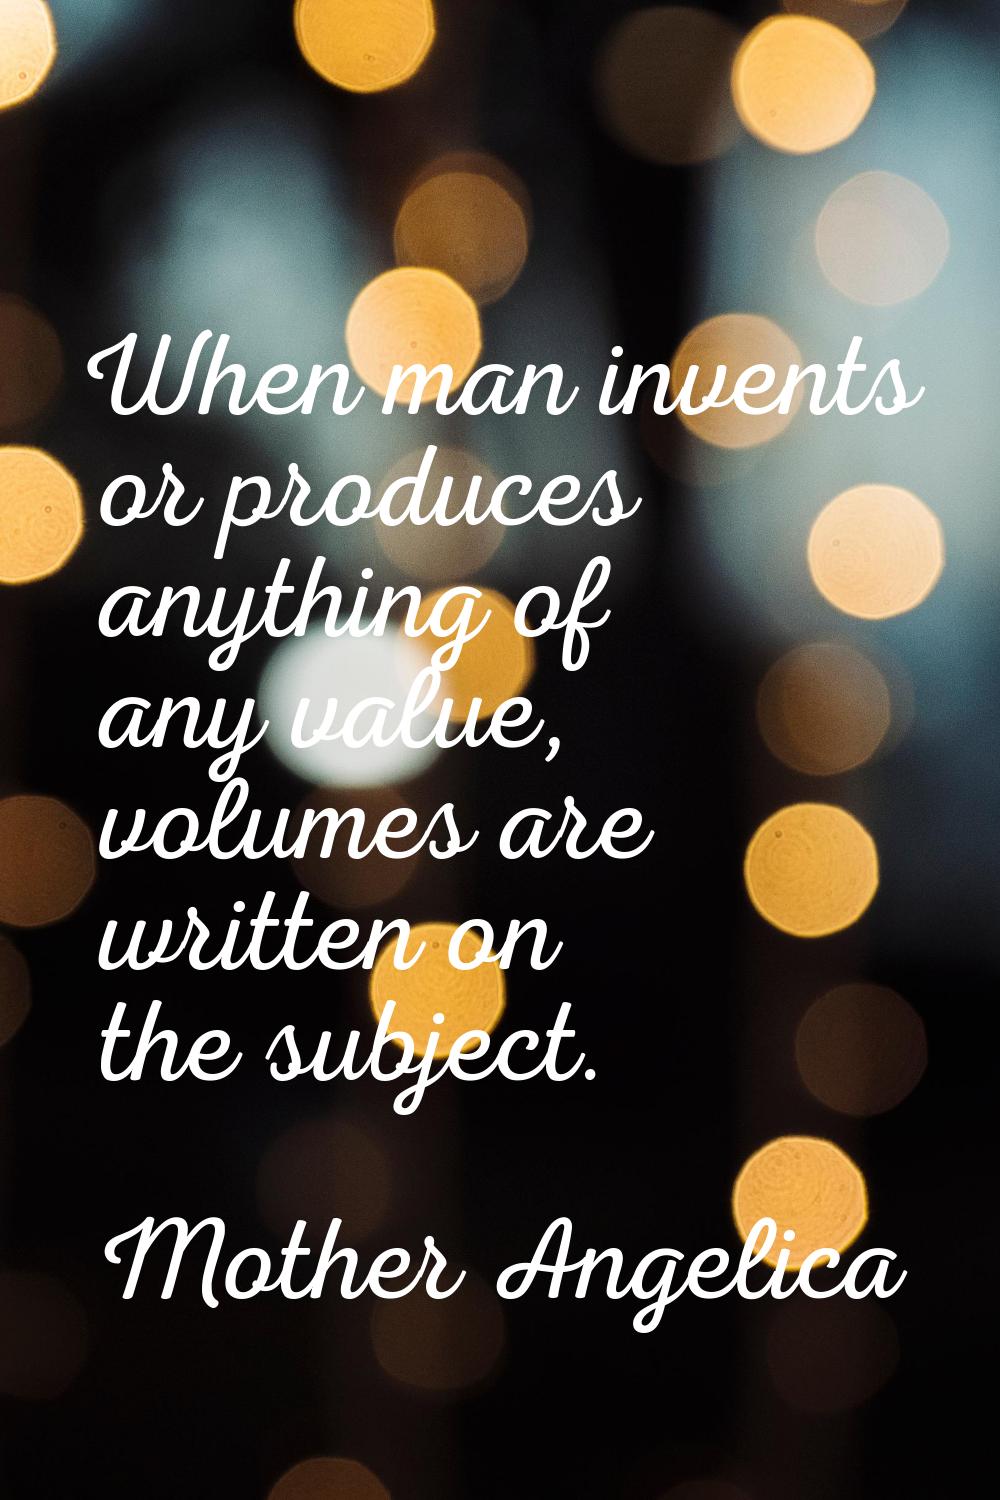 When man invents or produces anything of any value, volumes are written on the subject.